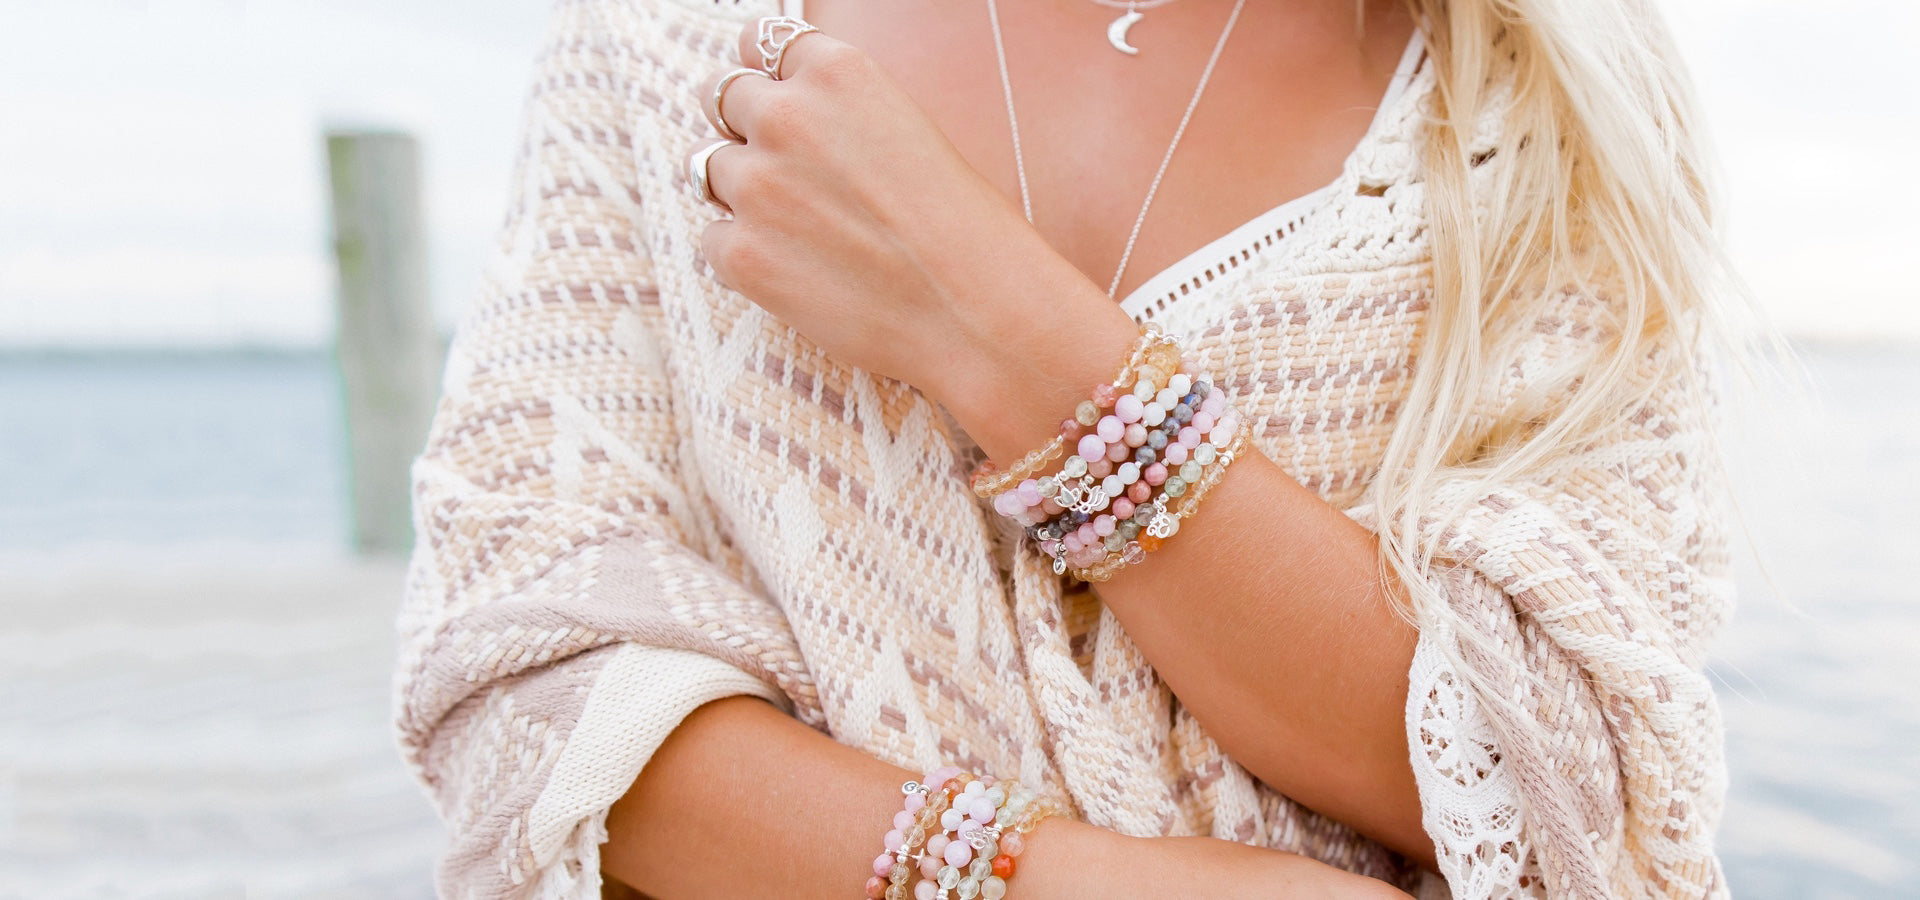 What does boho mean in jewellery?